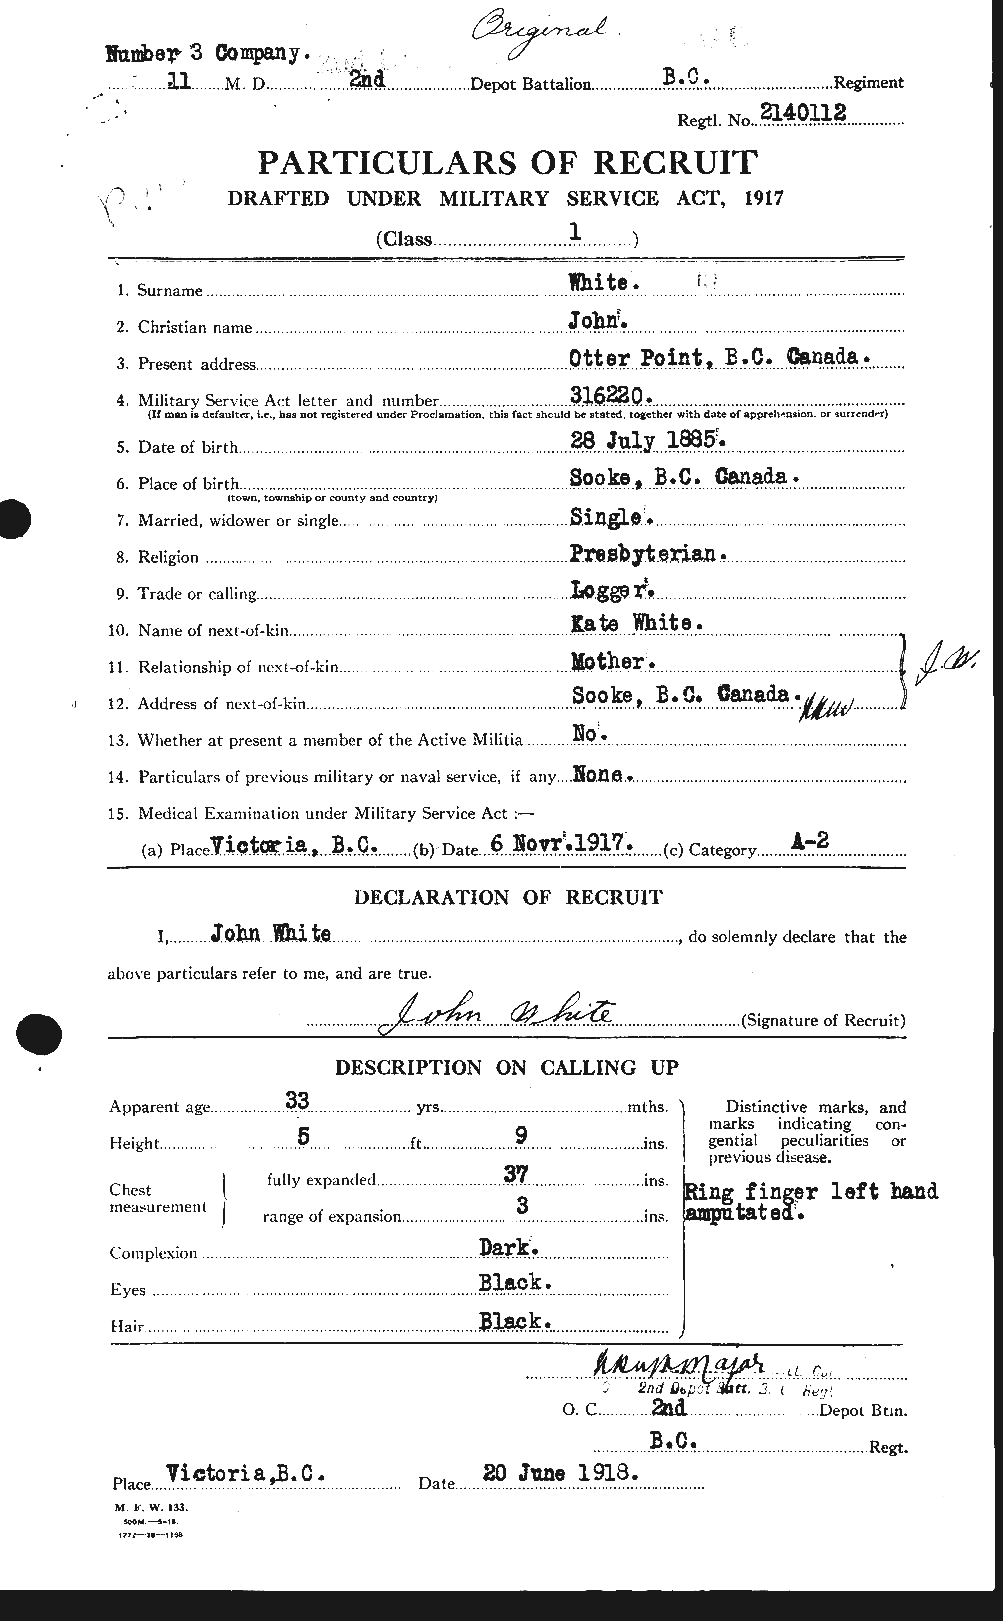 Personnel Records of the First World War - CEF 671527a